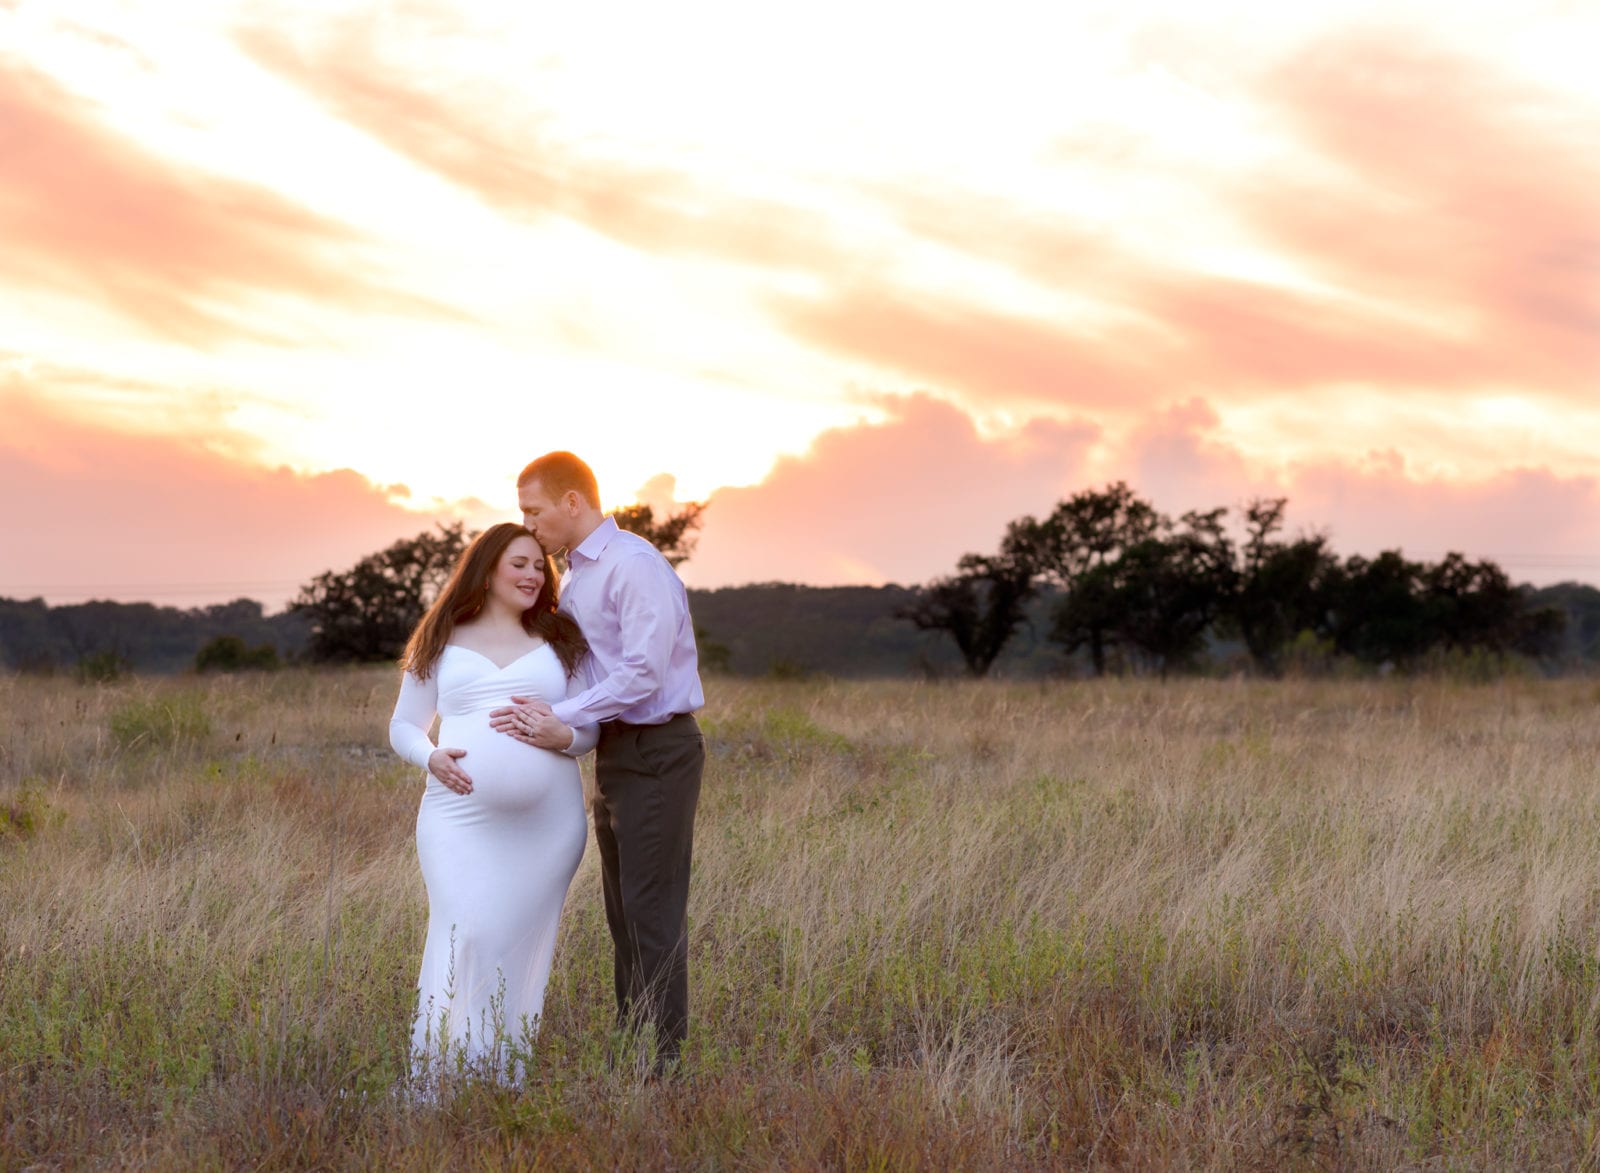 Maternity pics of a couple at sunset